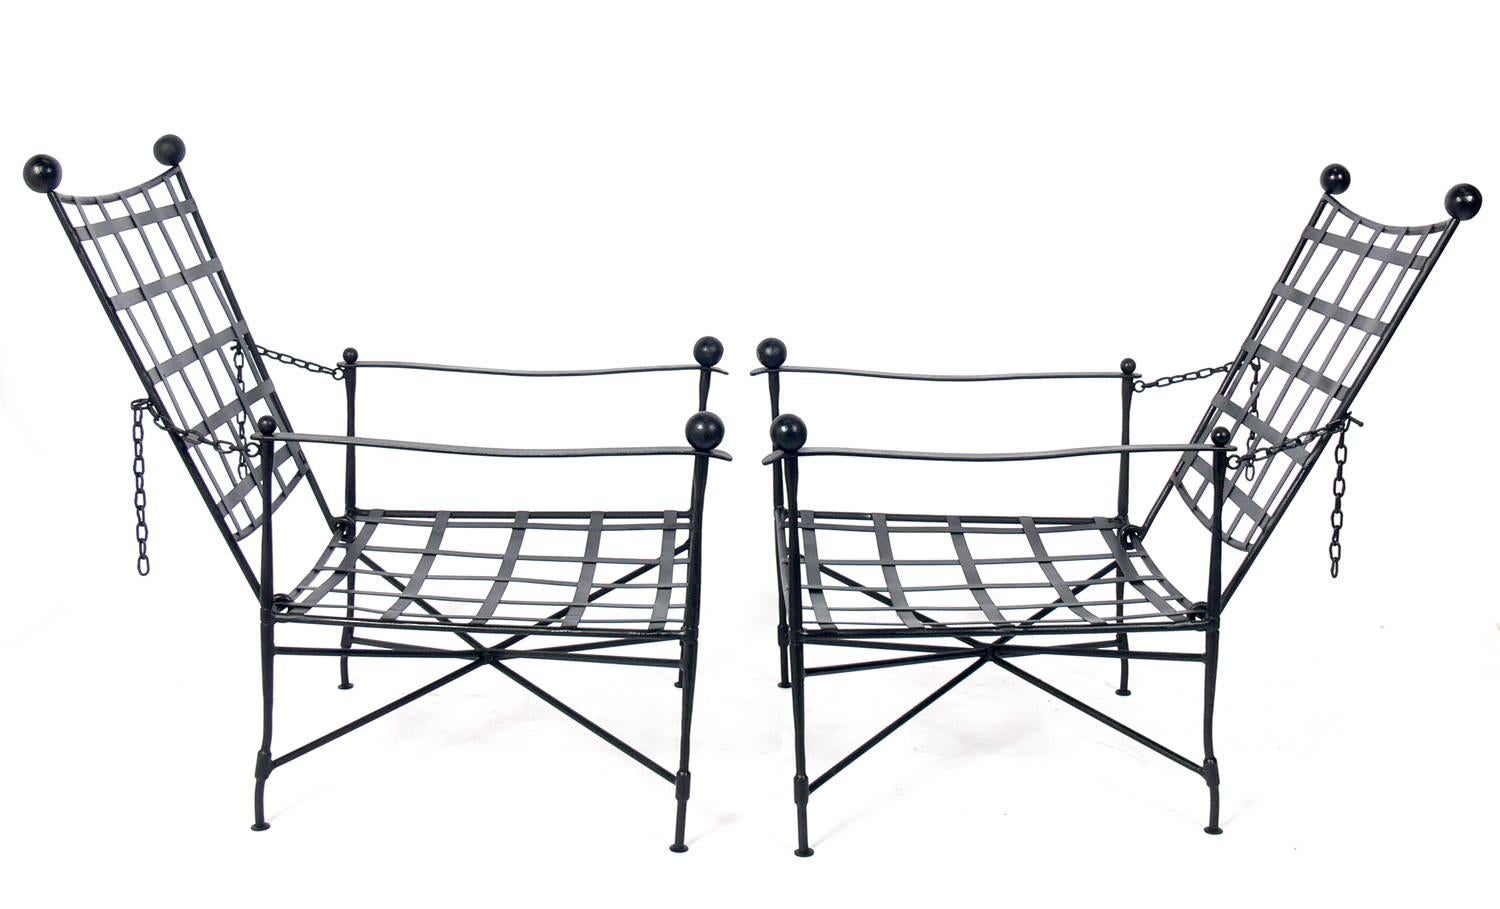 Pair of iron lounge chairs designed by Mario Papperzini for Salterini, Italian, circa 1950s. This is a versatile form and it can be used indoors or outdoors. This sculptural chair design was used by Yves Saint Laurent in his personal residence at la